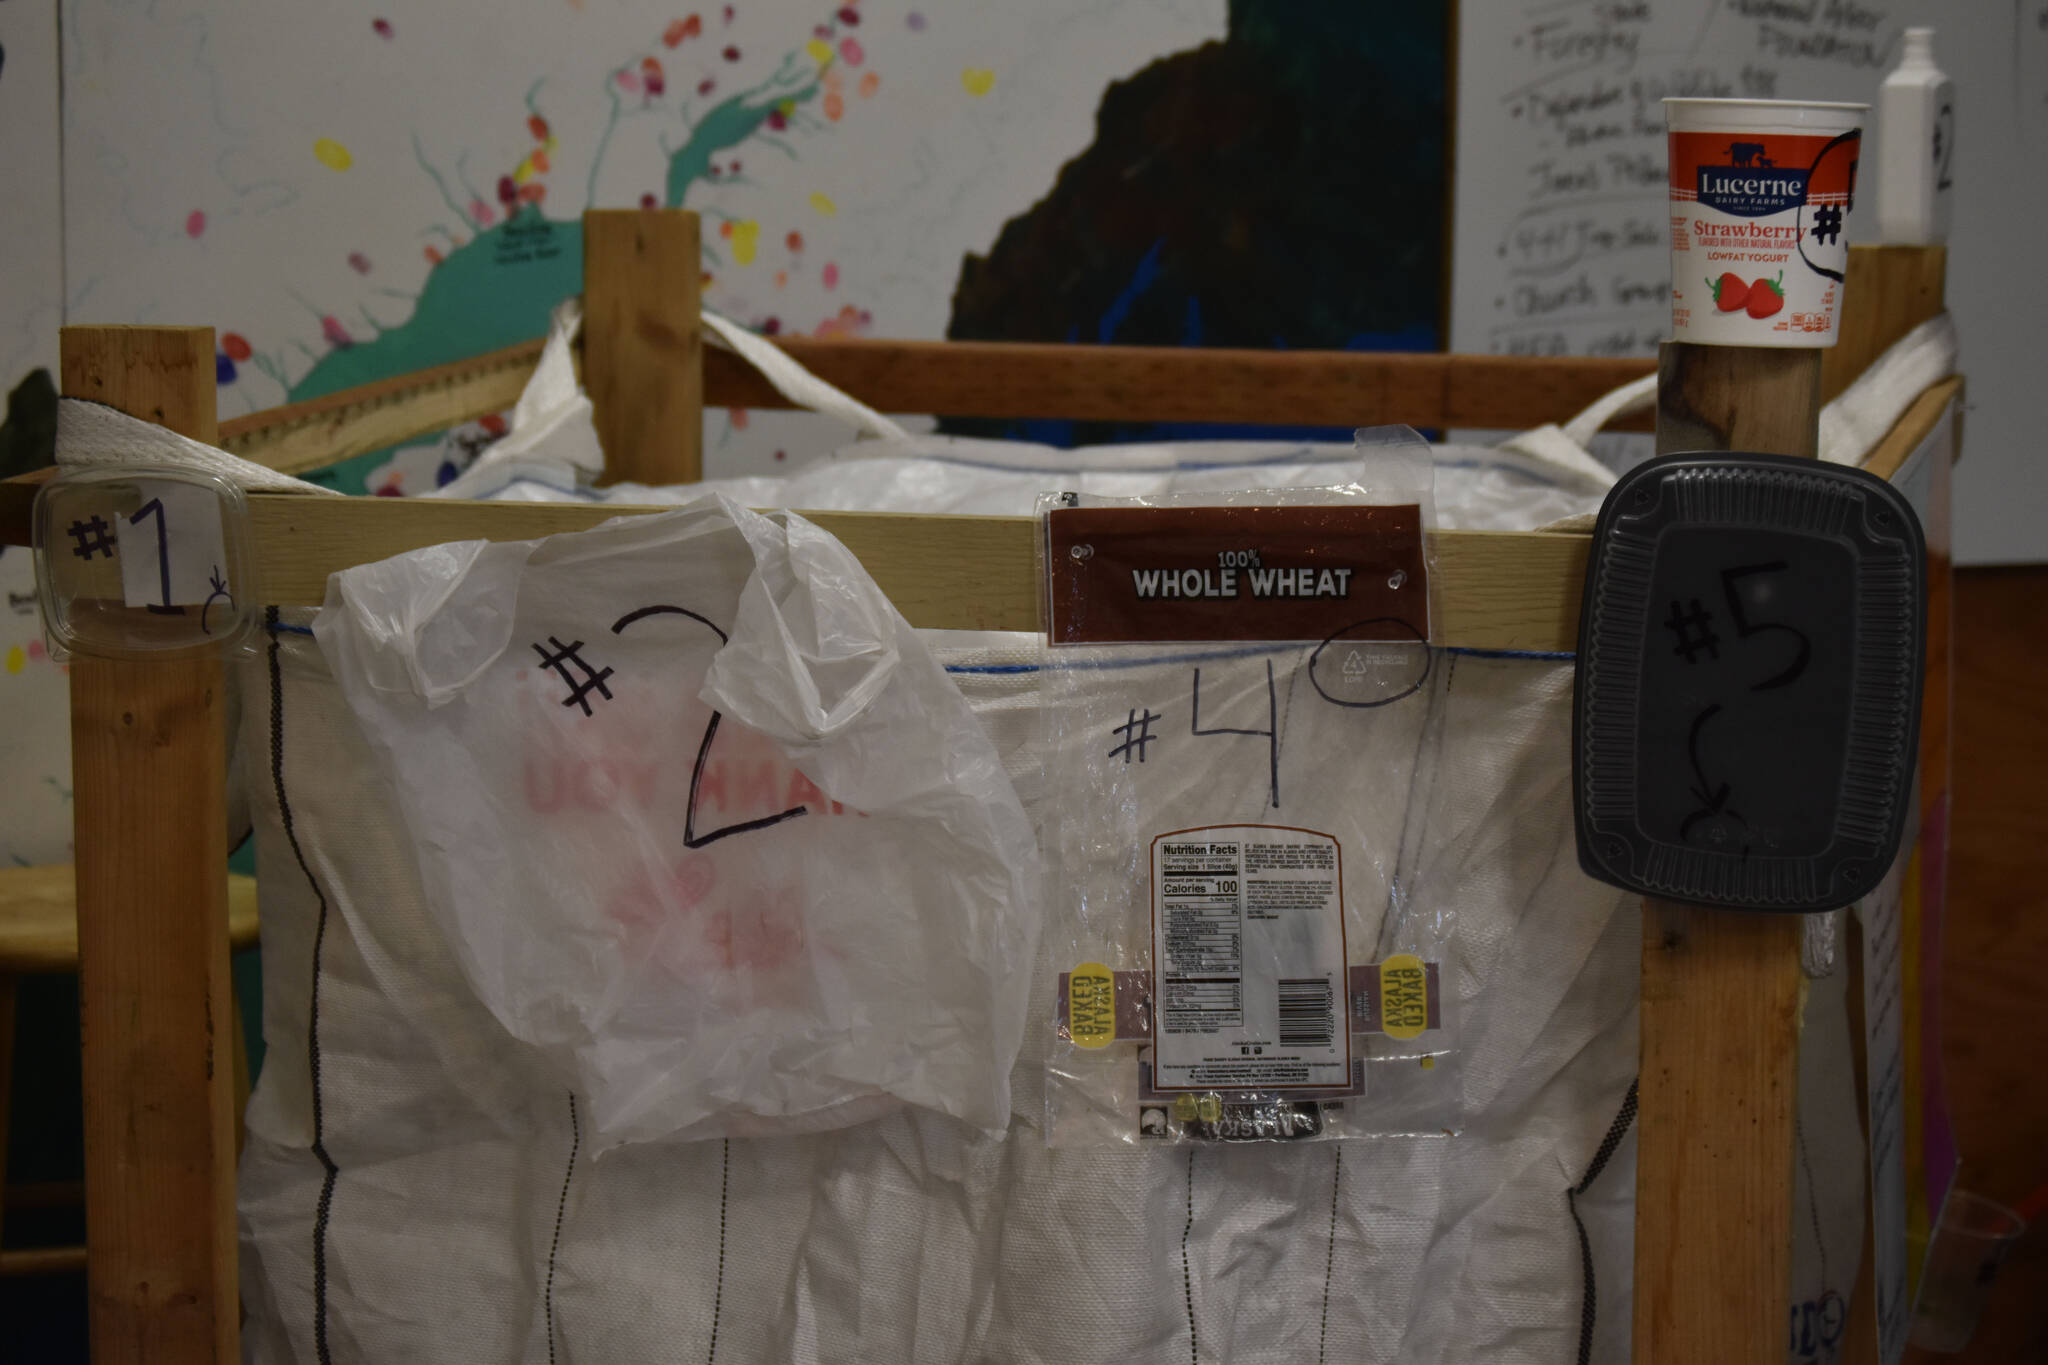 Examples of desired recyclables are displayed on the recycling super sack at the Cook Inletkeeper Community Action Studio in Soldotna, Alaska, on Aug. 11, 2022. (Jake Dye/Peninsula Clarion)